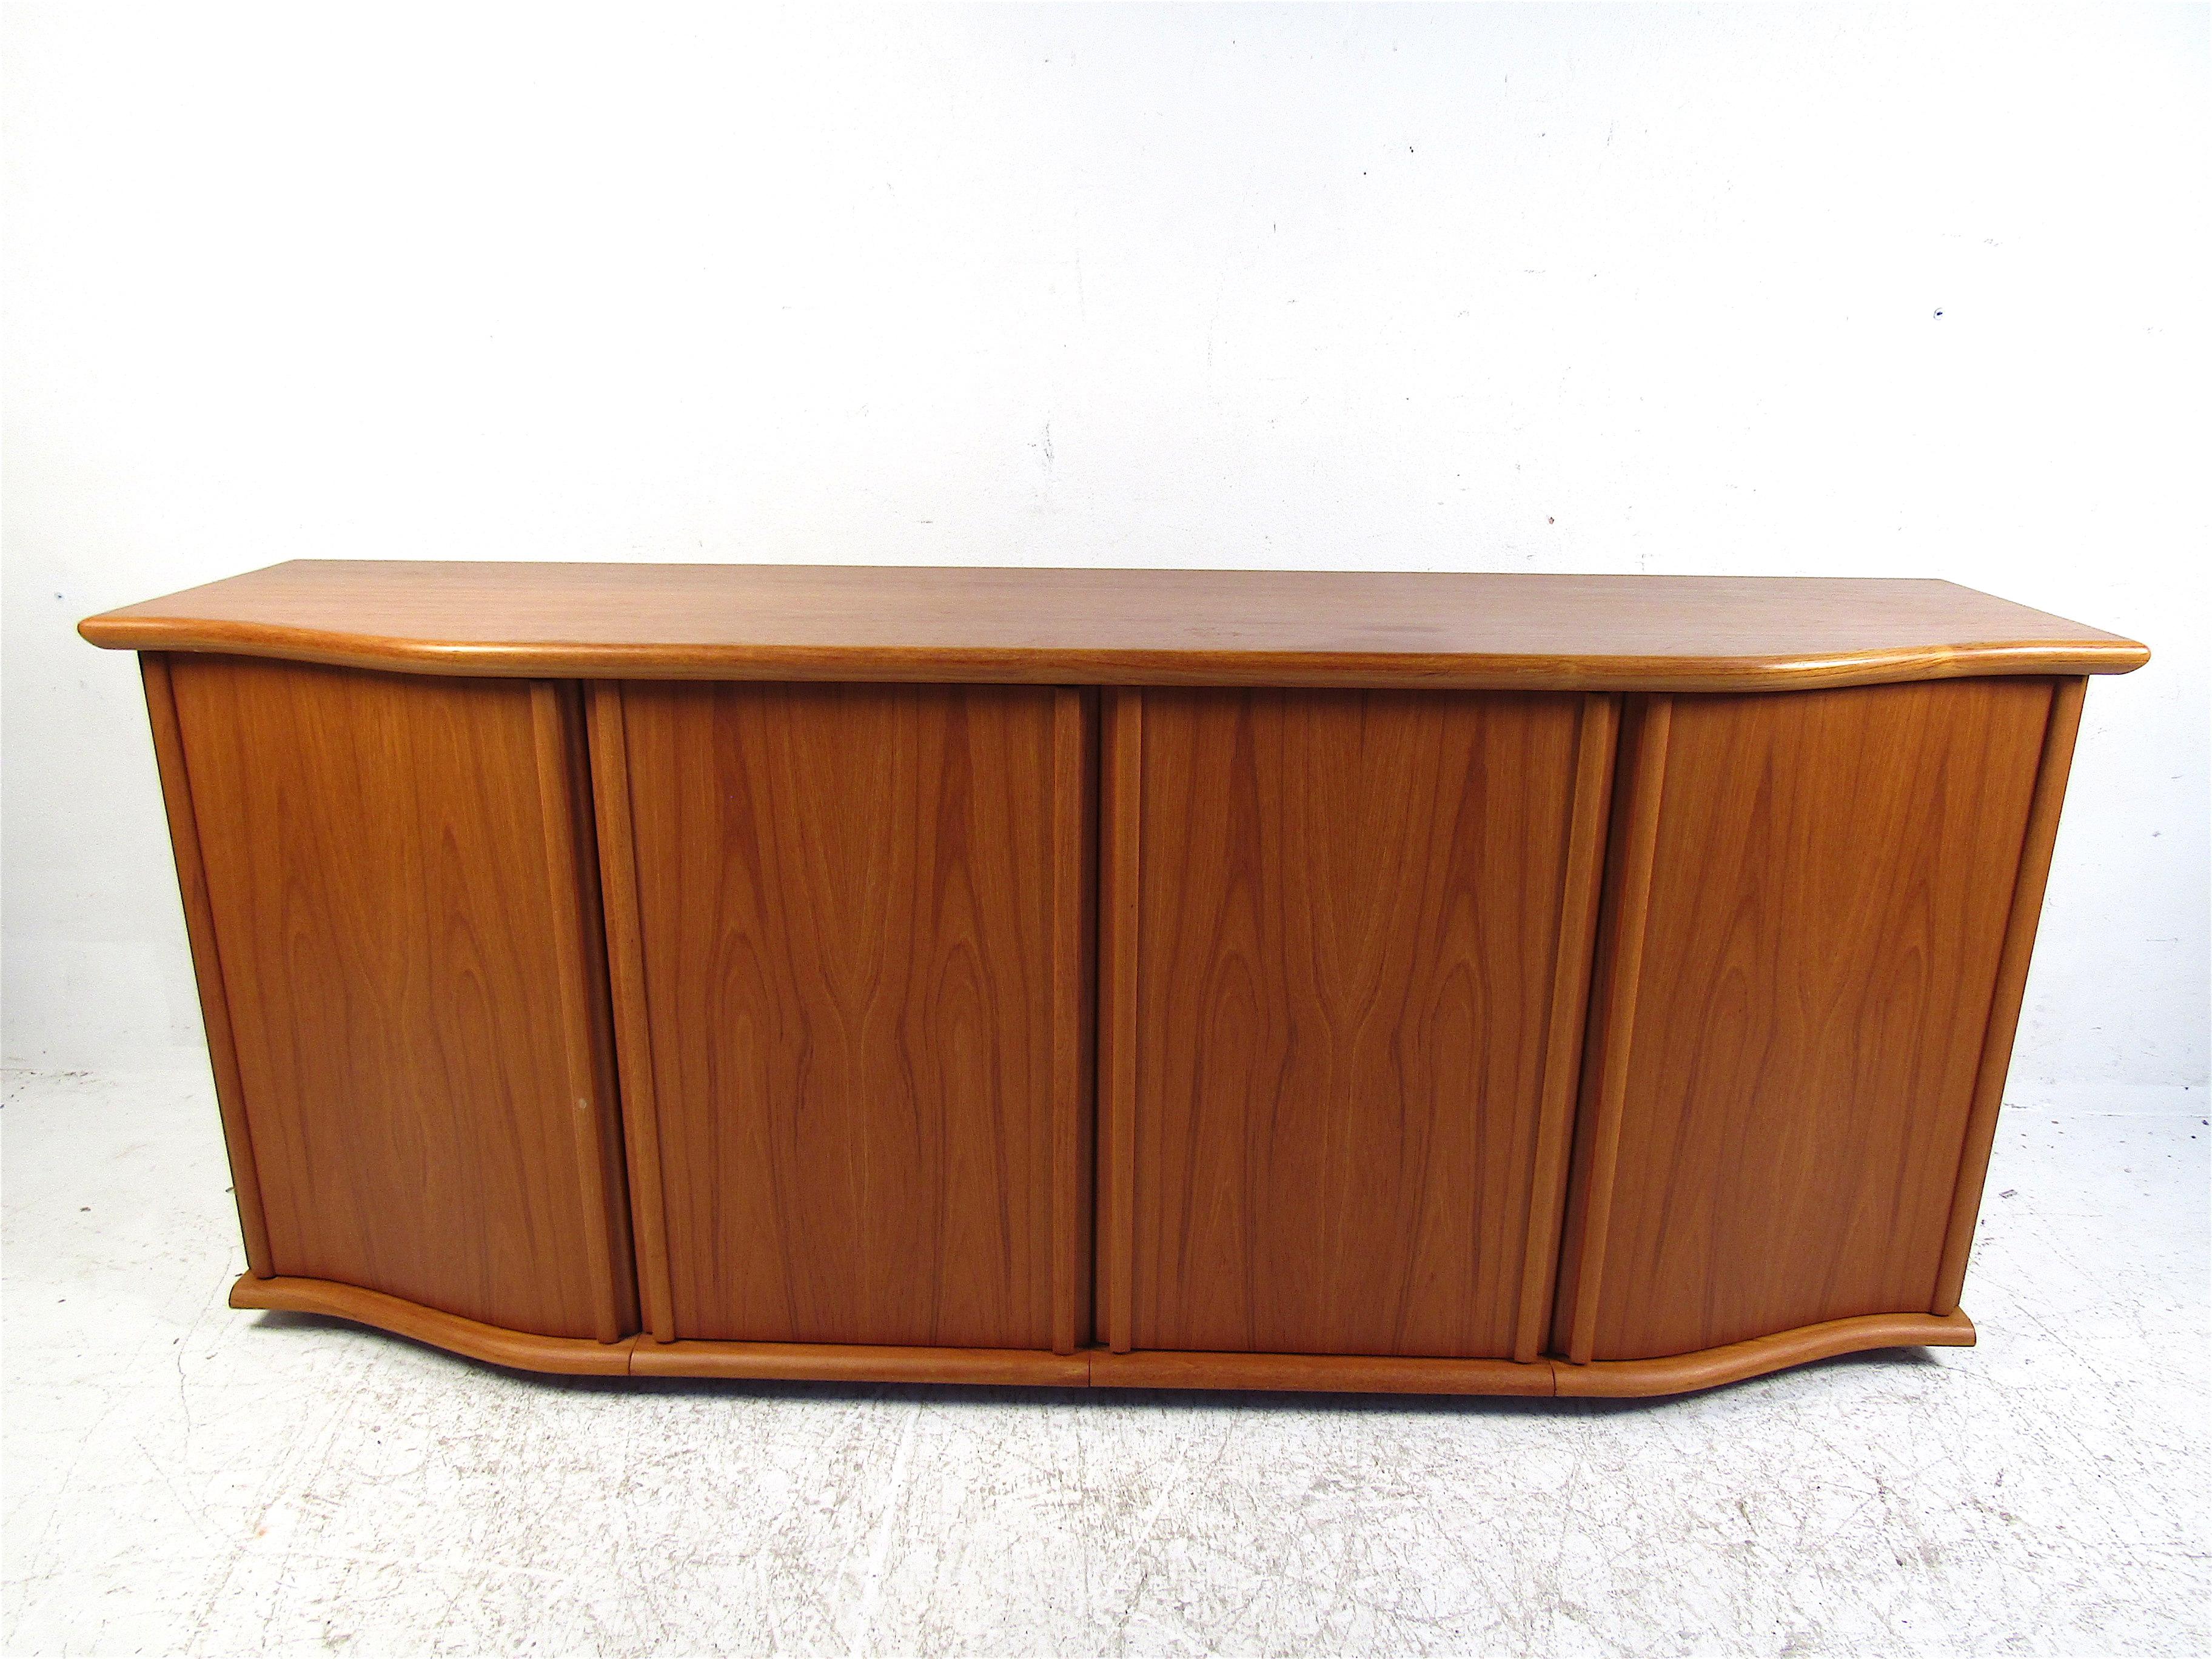 Unusual Danish modern credenza by Skovby. Please confirm item location with dealer (NJ or NY).